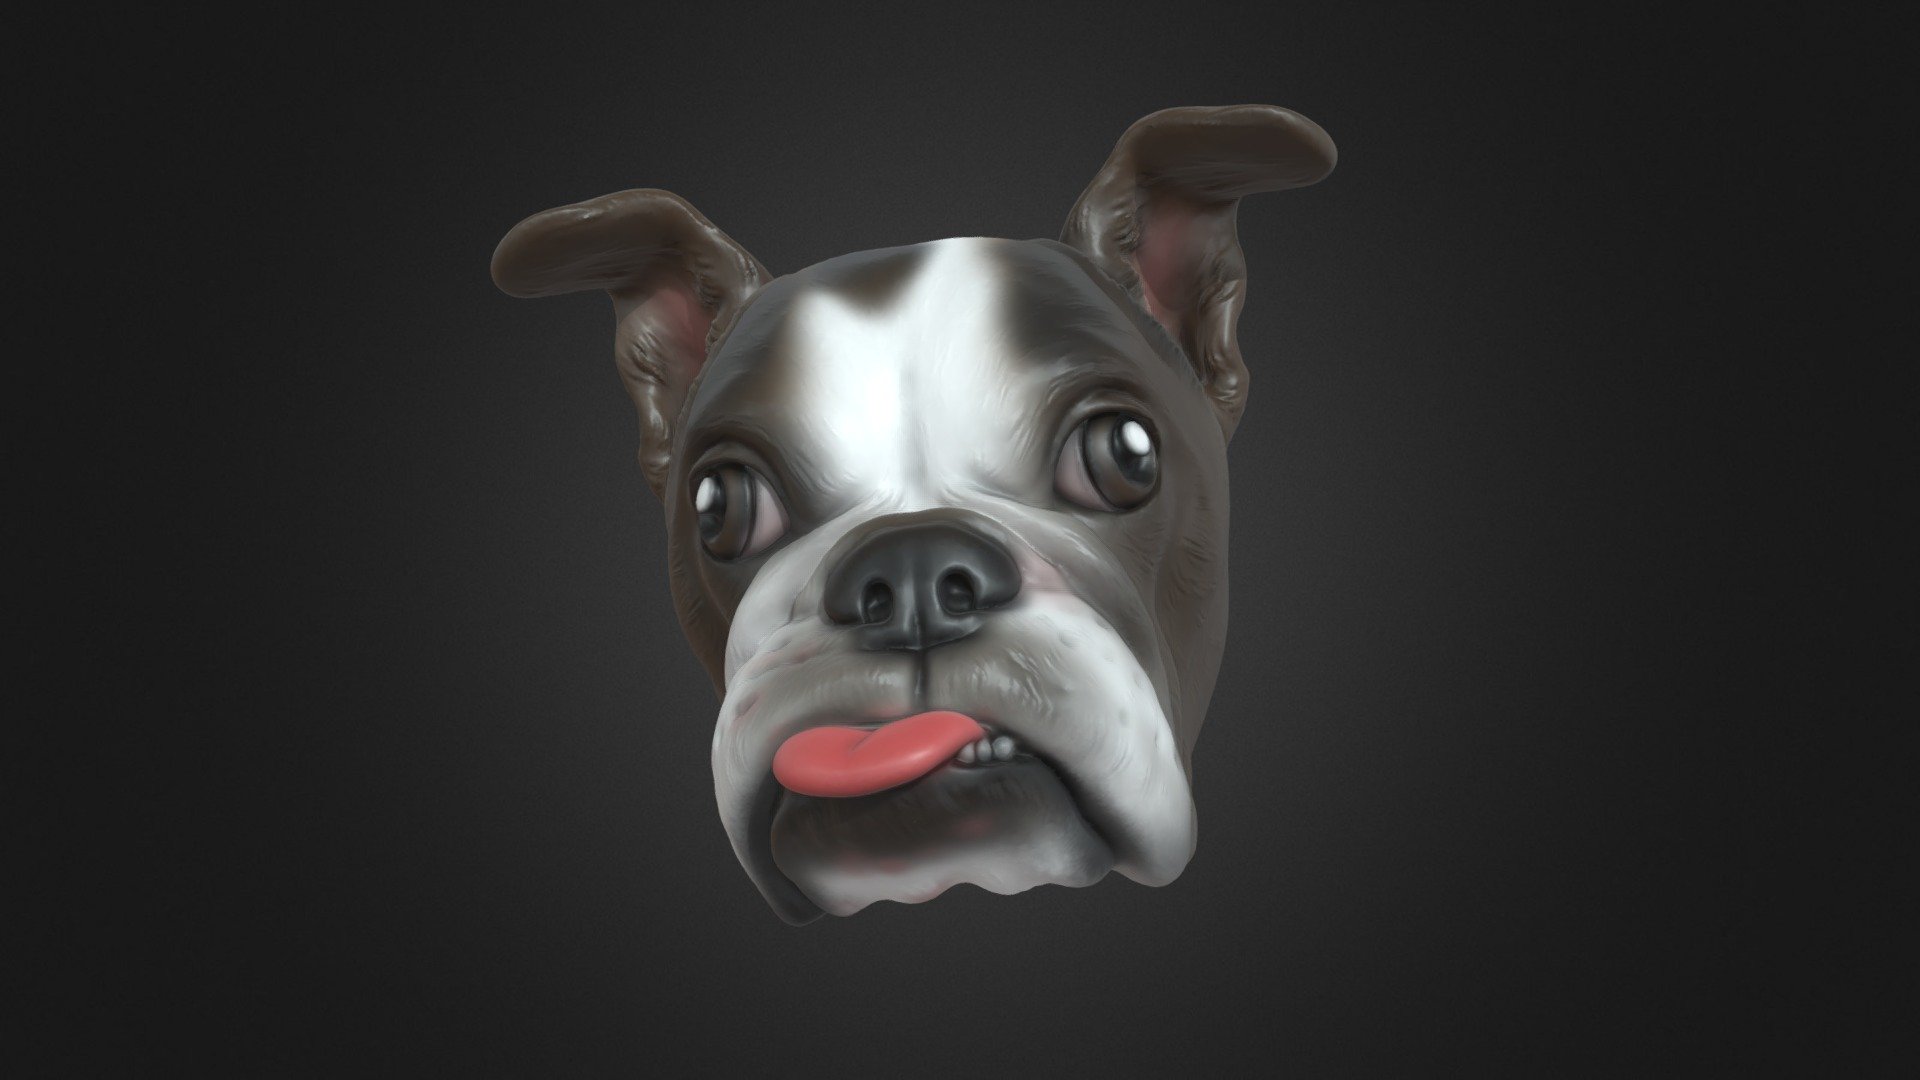 Seed by mi custom made French Bulldog model.

Interested to order custom made jewellery (e.g. Ring, Necklace, Earrings, Bracelet, Brooch, Magnet, Hair clips, Cufflinks etc.)?  Please visit our online store, facebook page or instagram 3d model